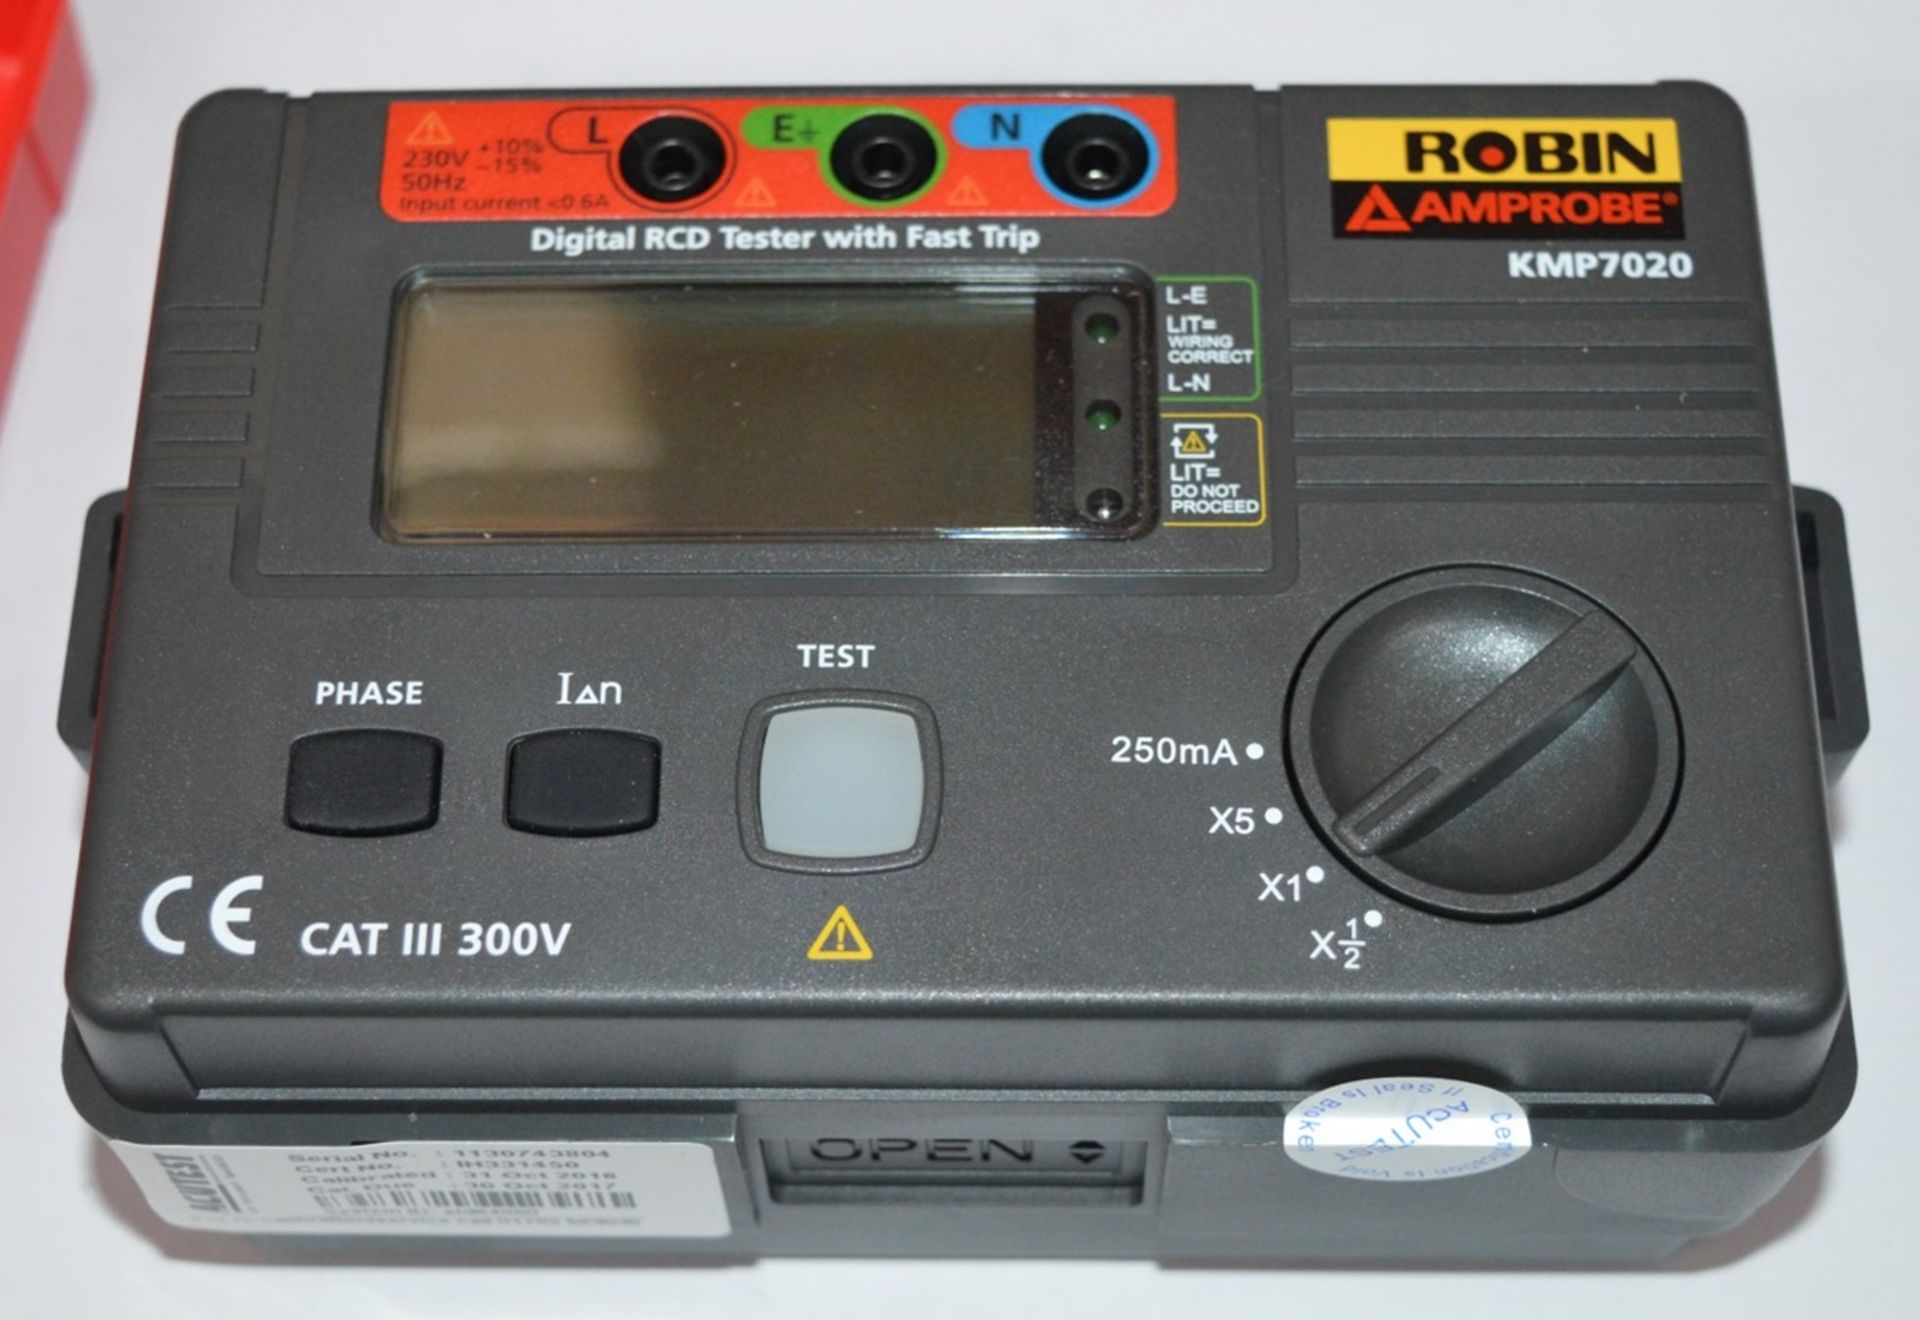 1 x Robin Amprobe Digital RCD Tester Wth Fast Trip - Model KMP7020 - Boxed With All Accessories - - Image 4 of 12